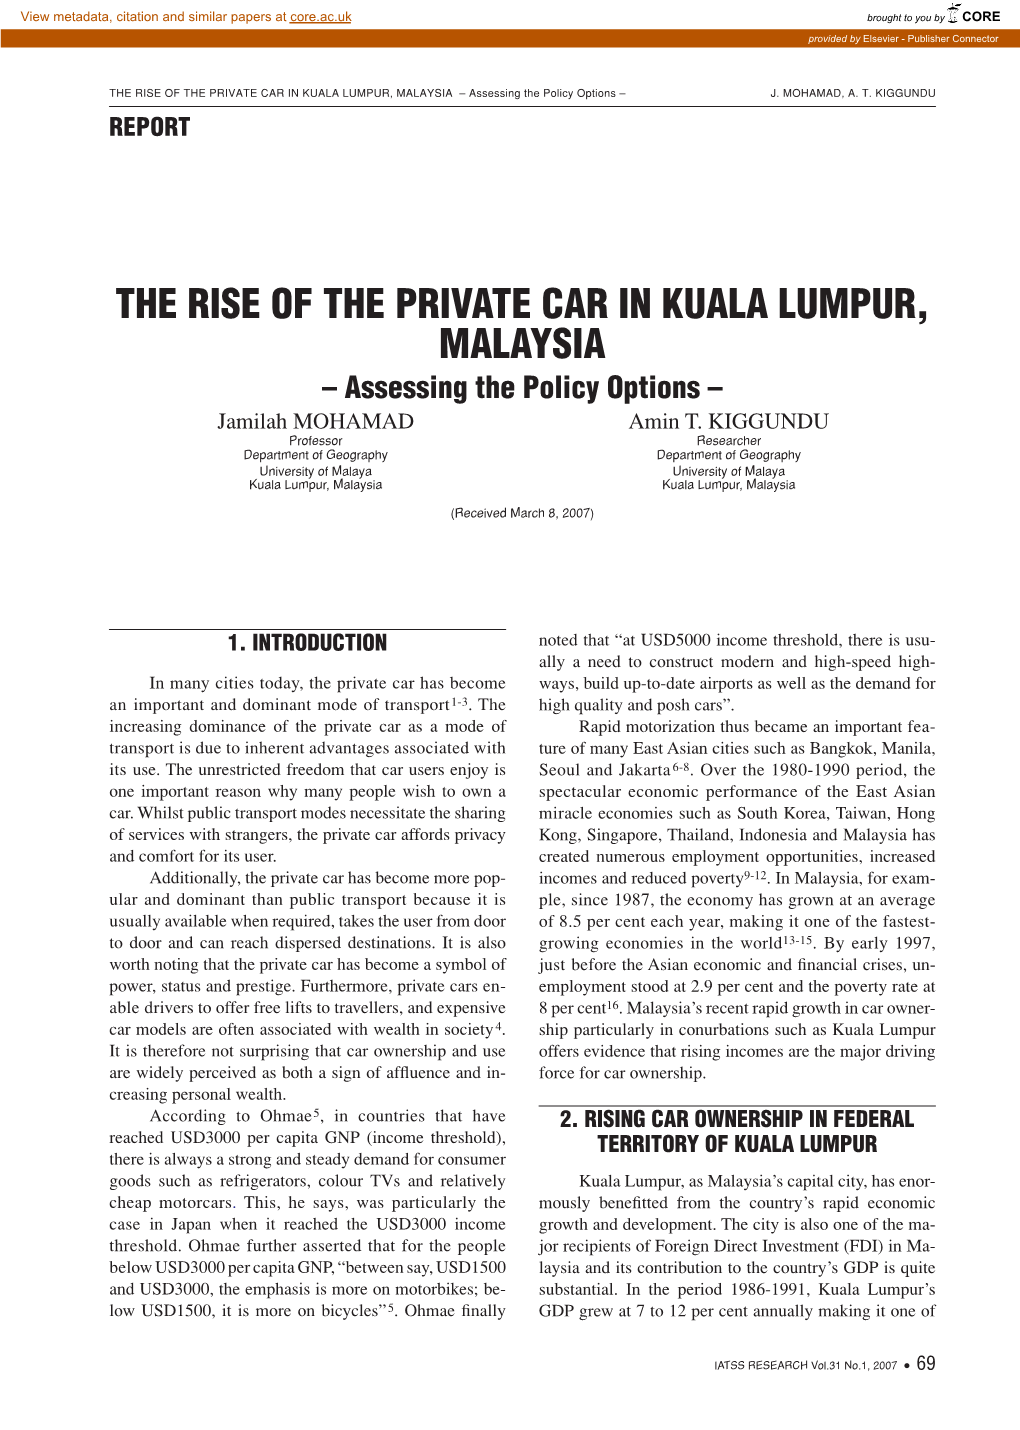 THE RISE of the PRIVATE CAR in KUALA LUMPUR, MALAYSIA – Assessing the Policy Options – J